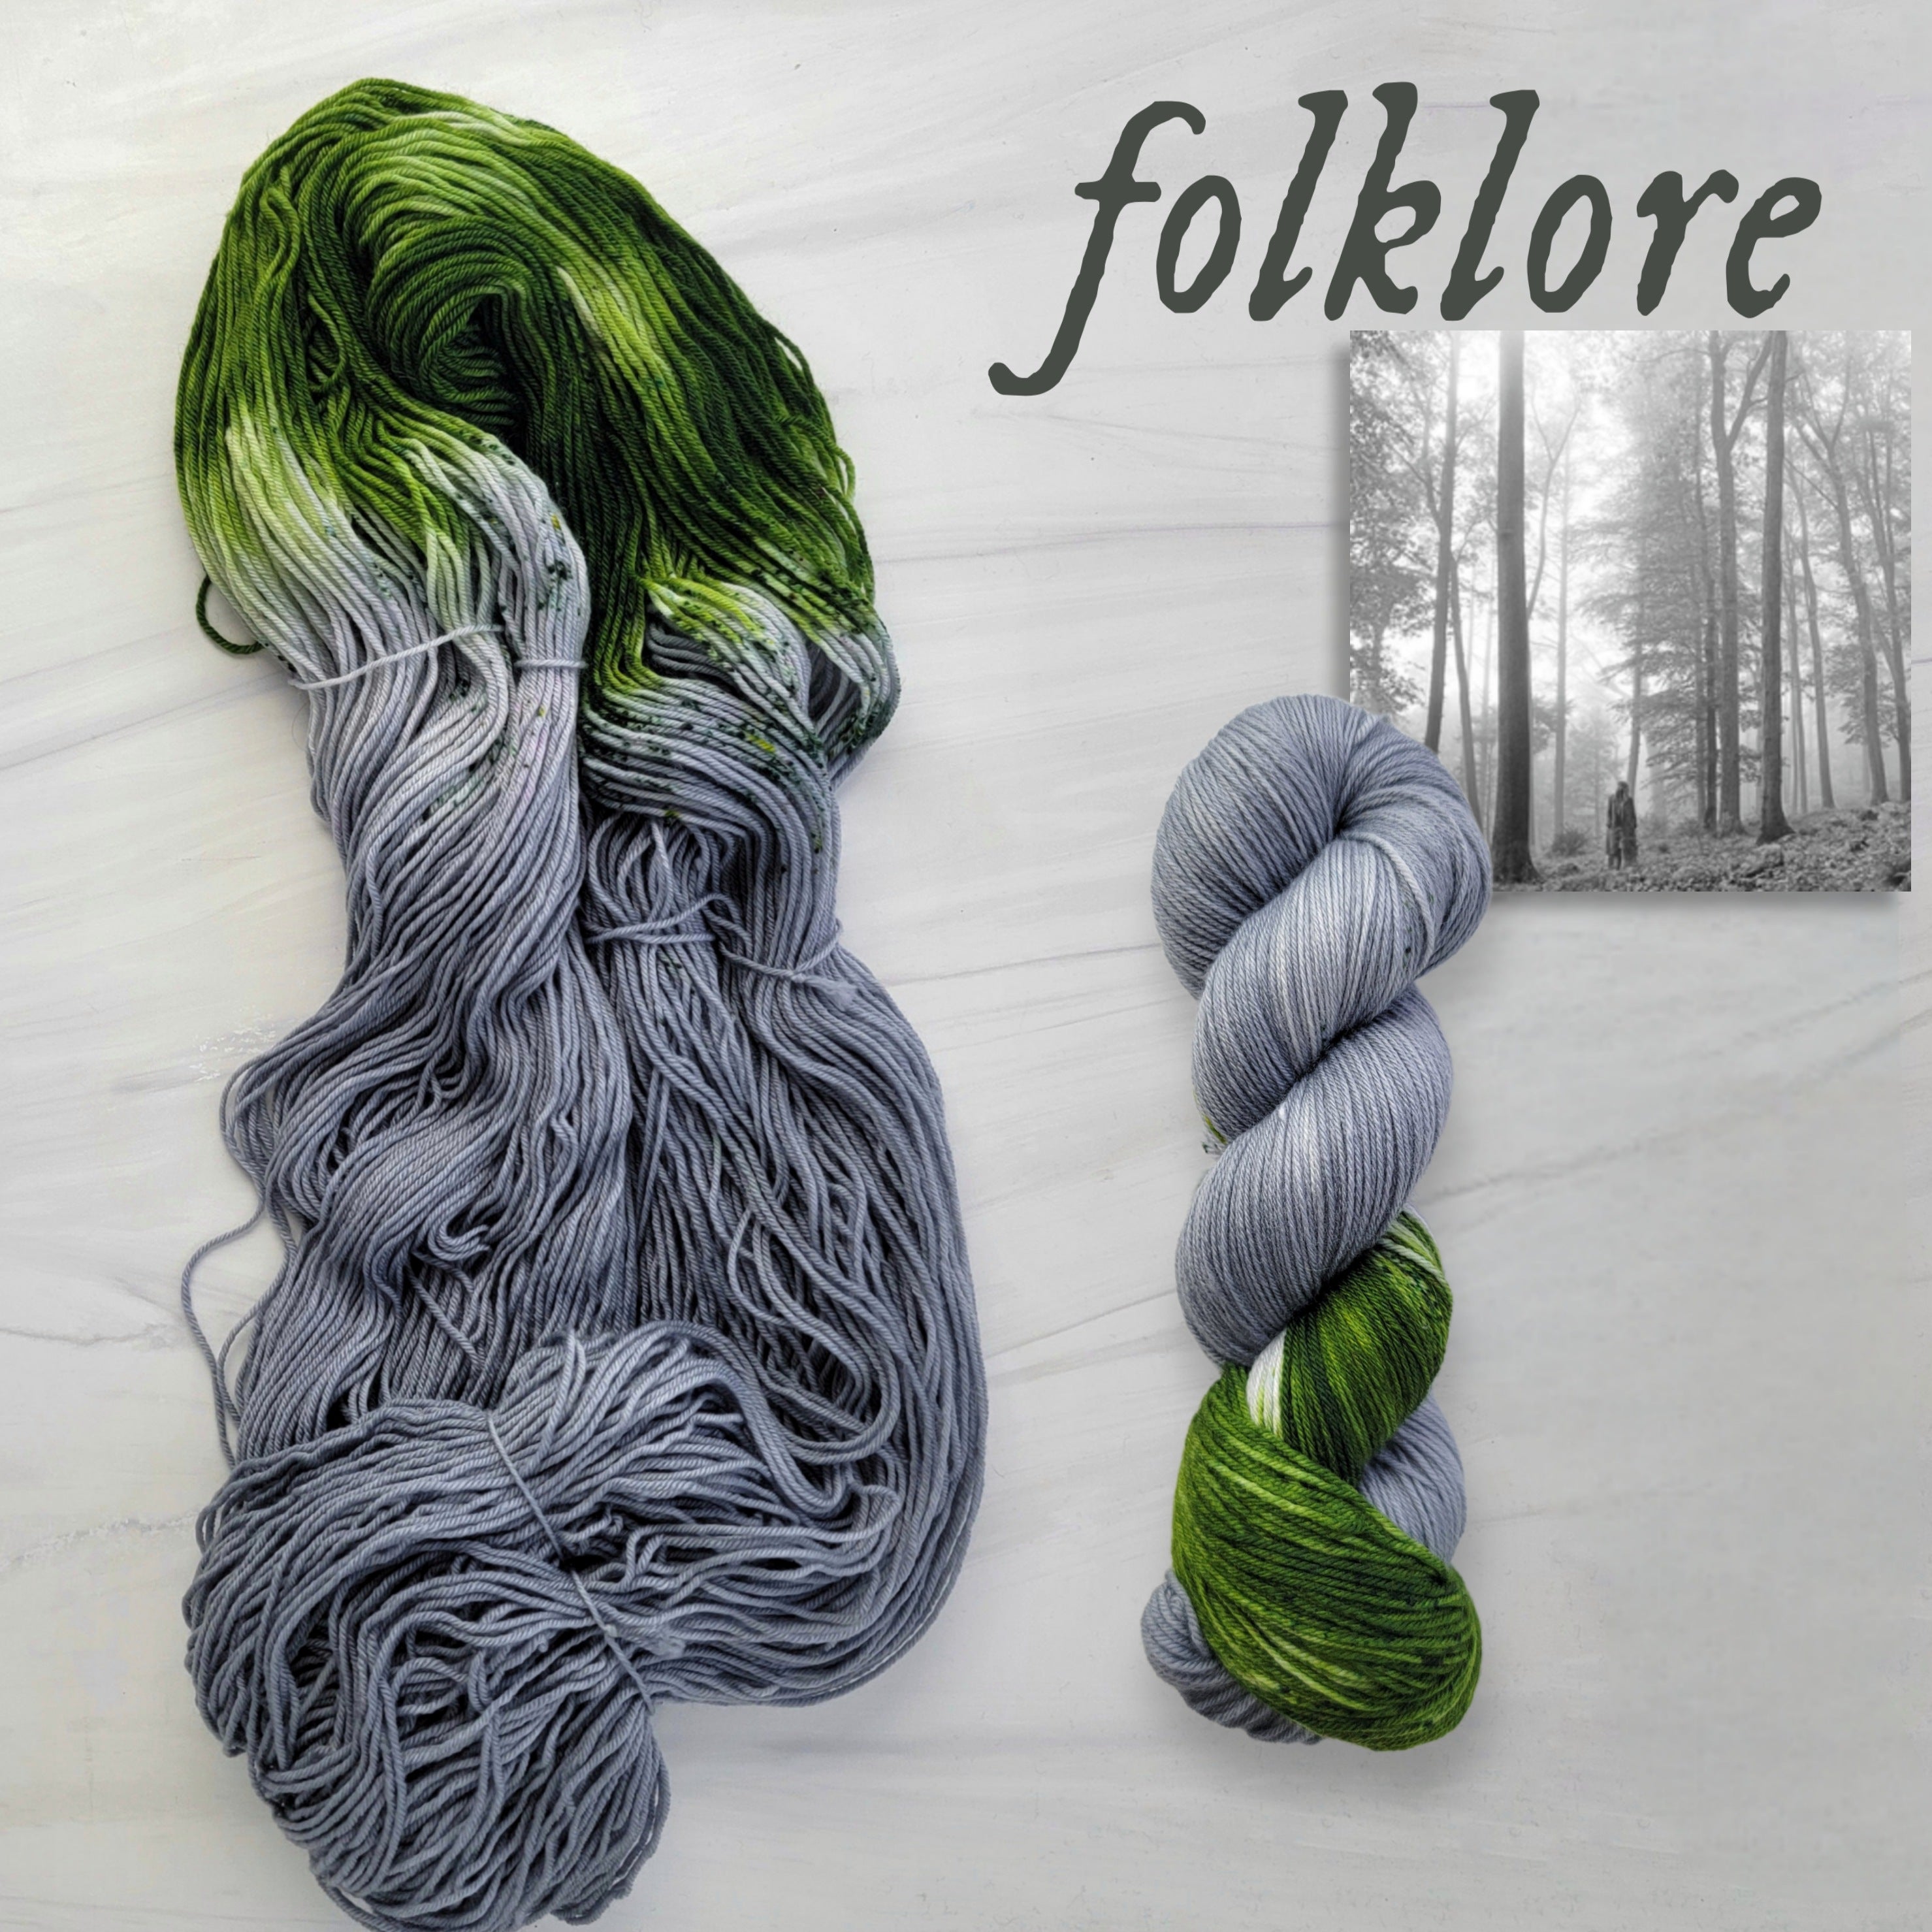 Folklore - Hand dyed sock yarn - grey and moss green speckled